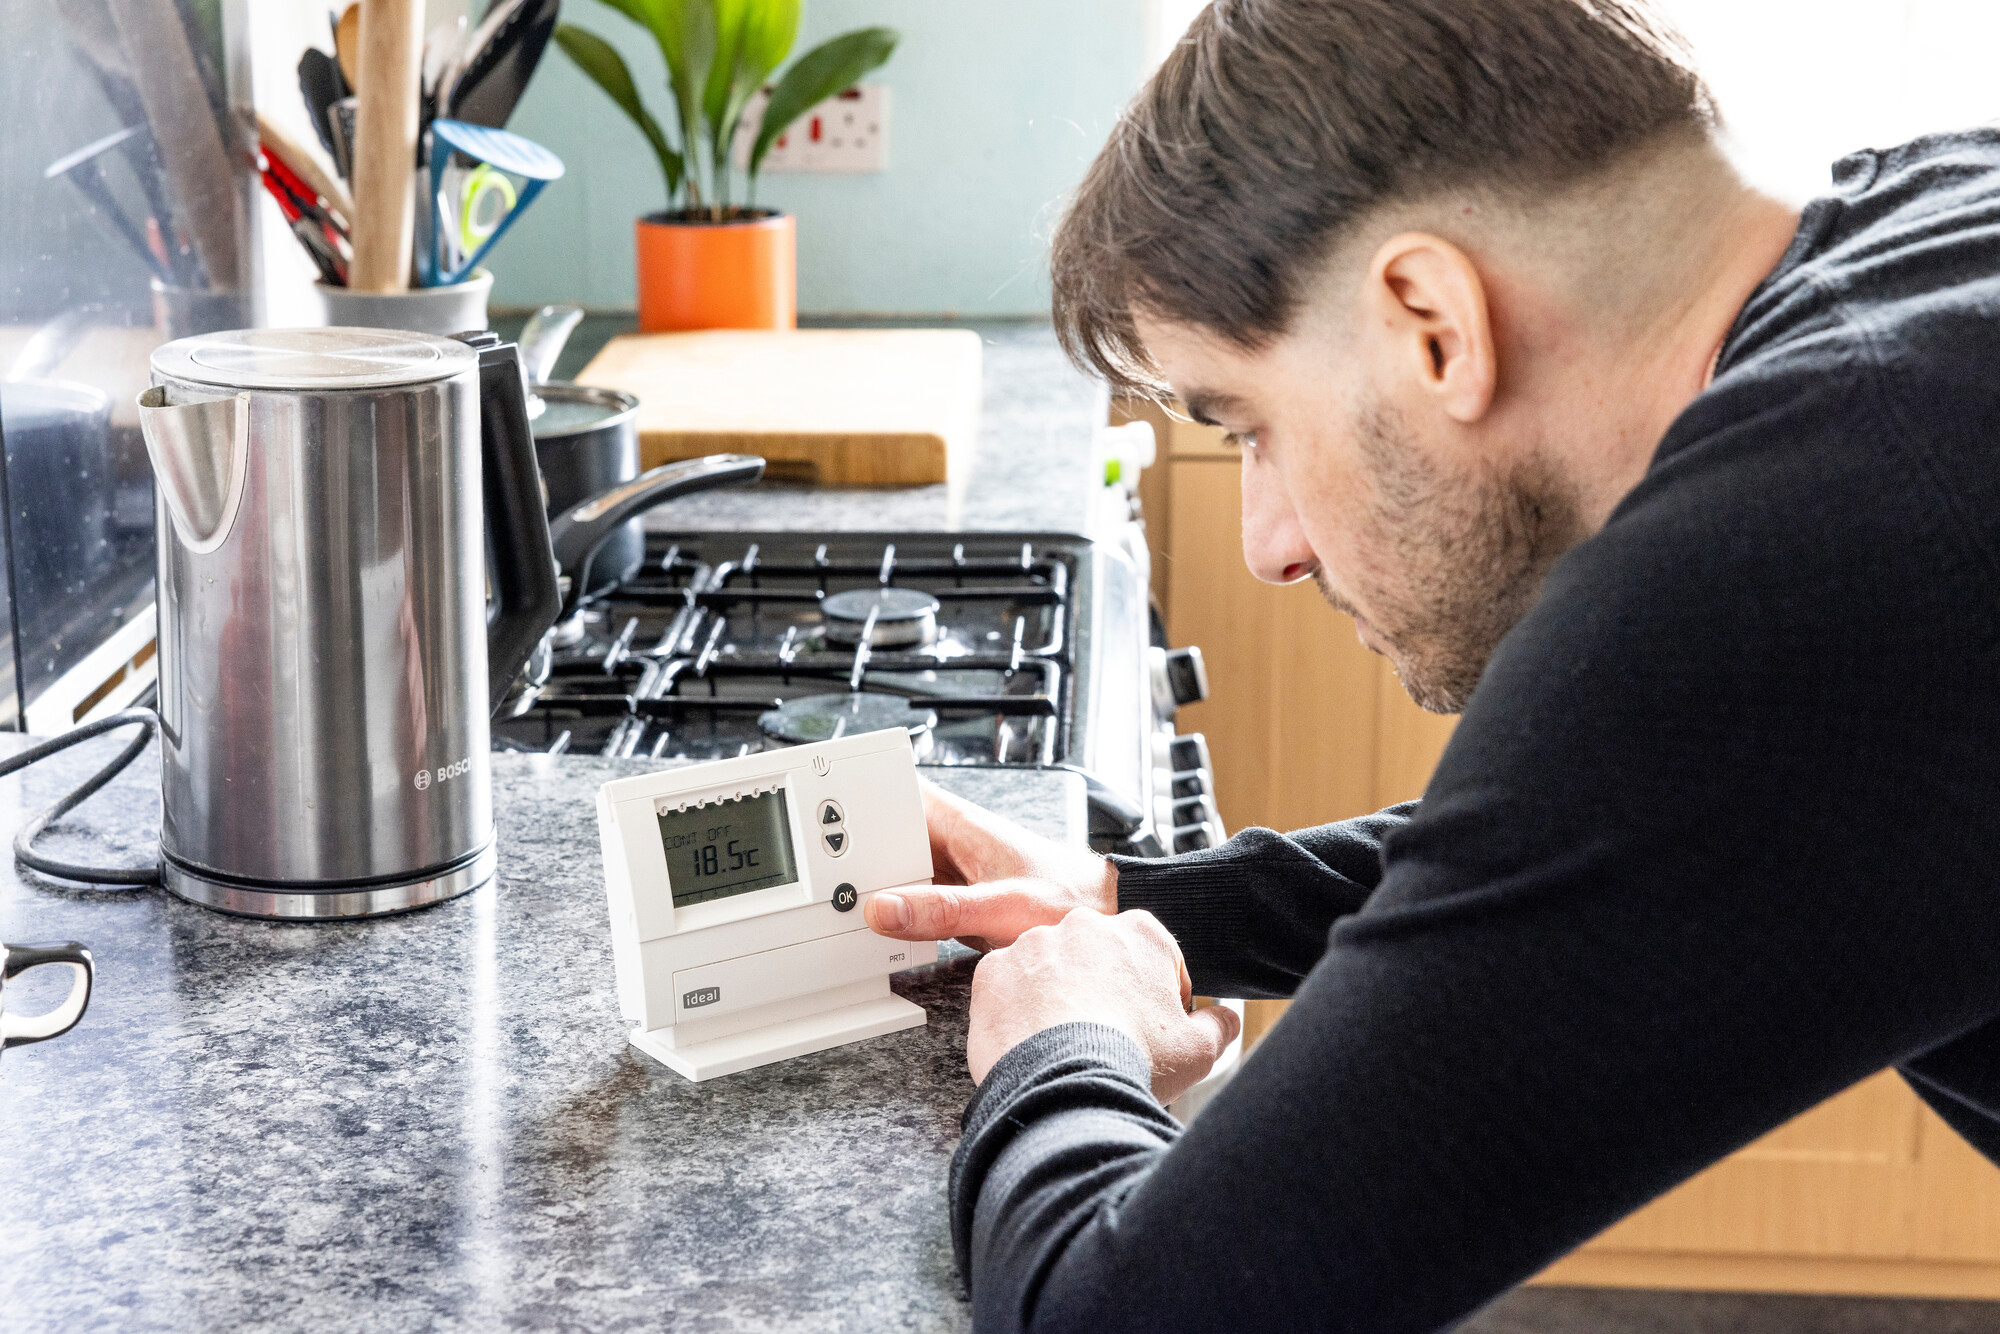 A man looks at his energy smart meter in the kitchen with his kettle in the background.